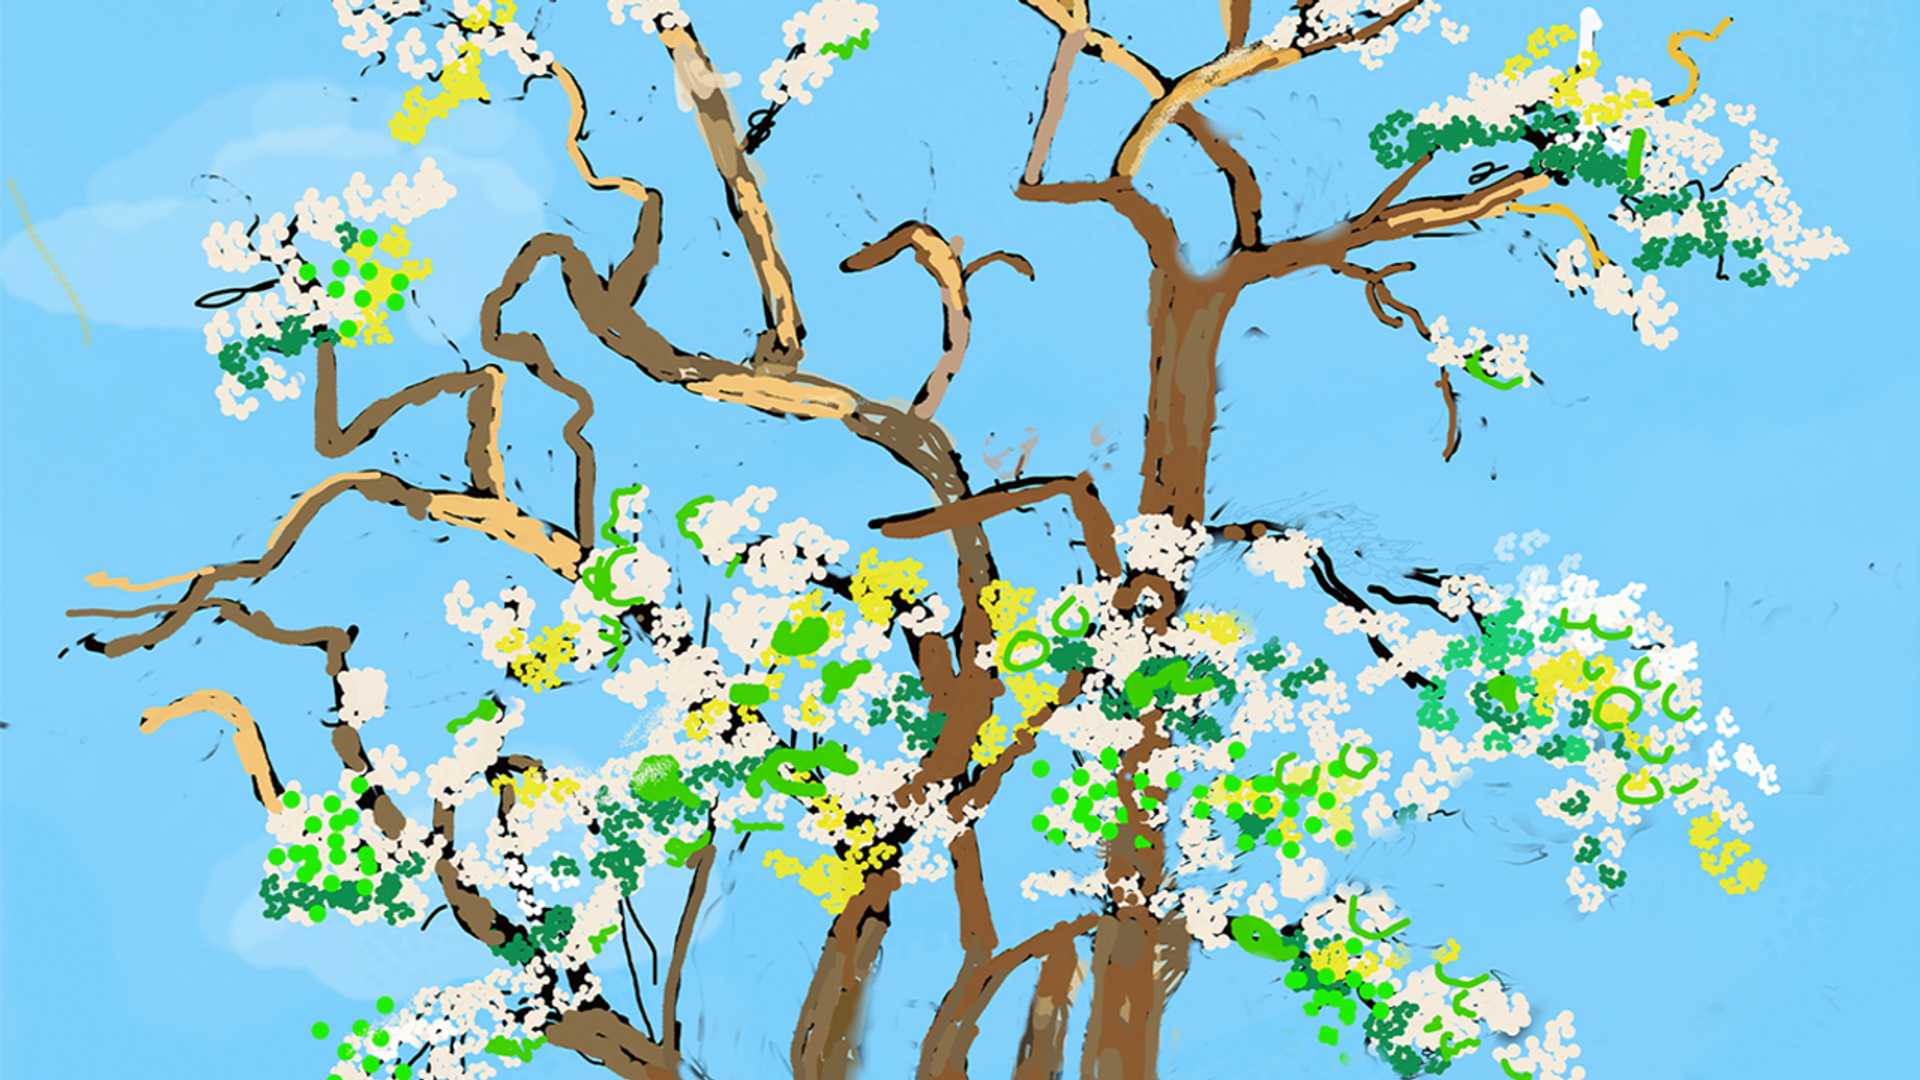 This iPad drawing by David Hockney shows a flowering tree in white and greens against a bright blue sky.